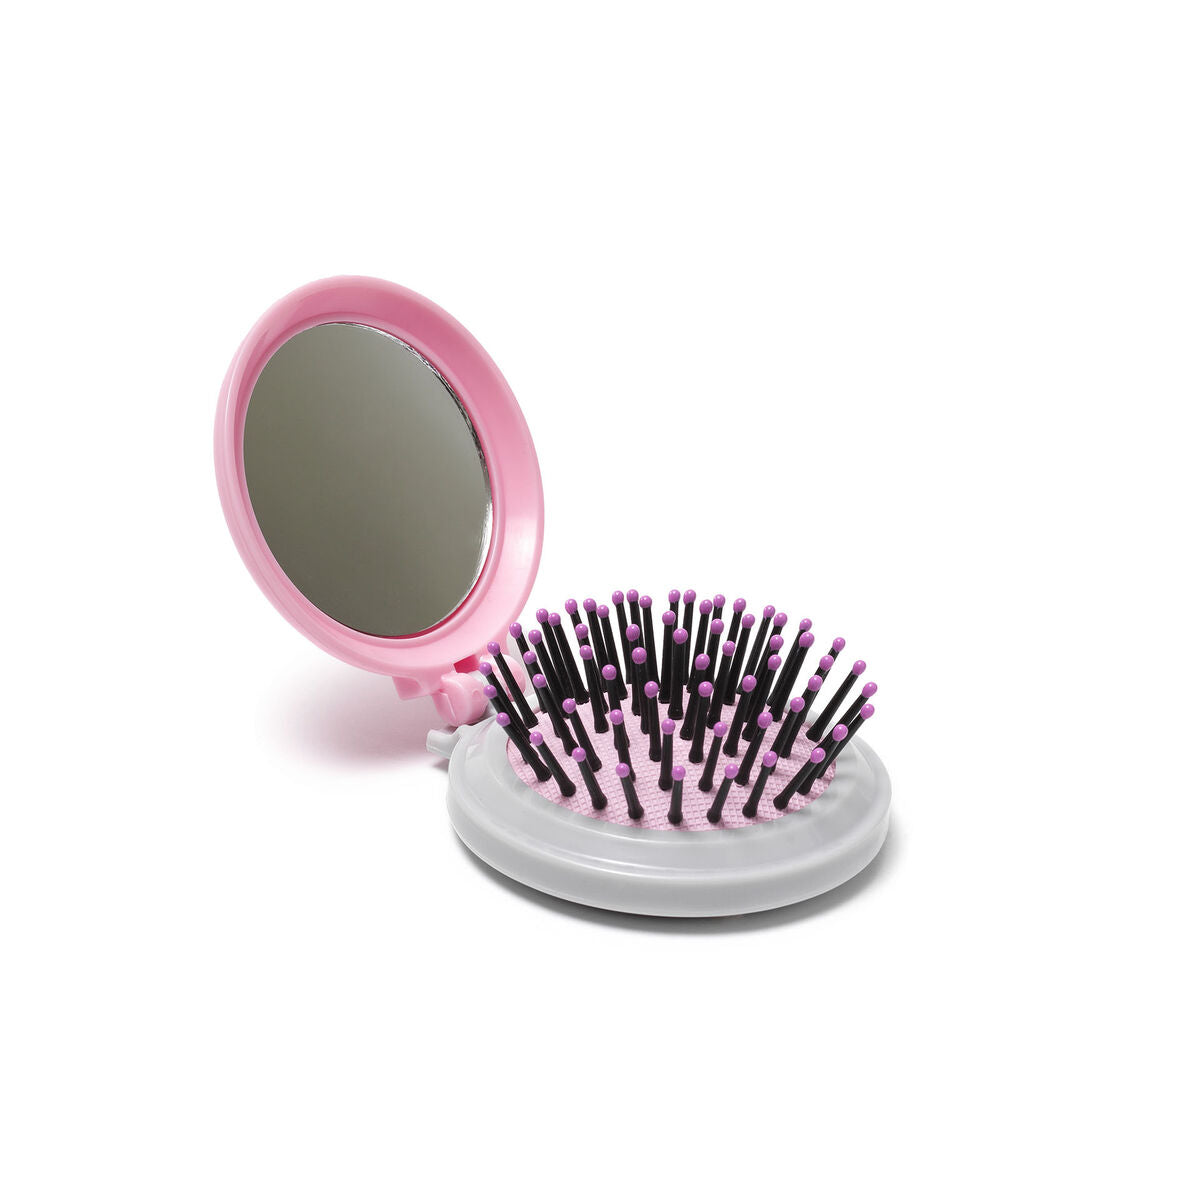 Hair Brush/Mirror Compact- Assorted